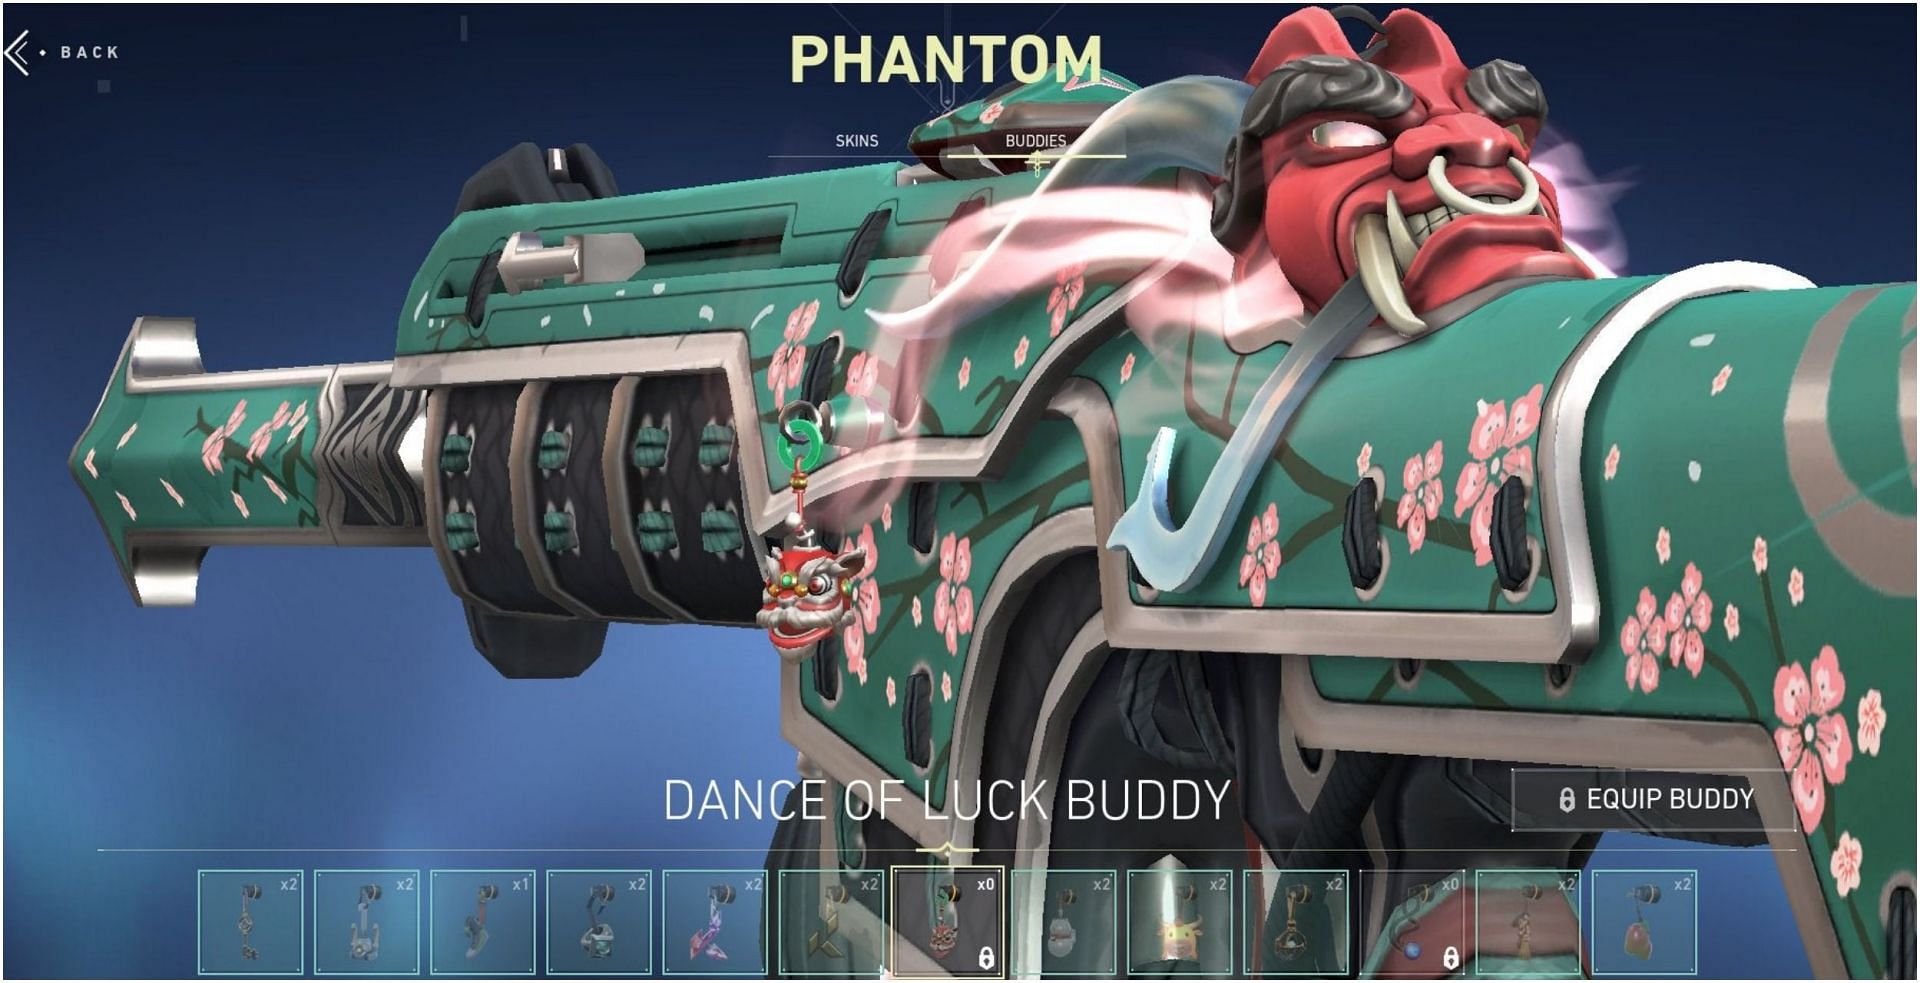 How to unlock Valorant's Dance of Luck gun buddy for free